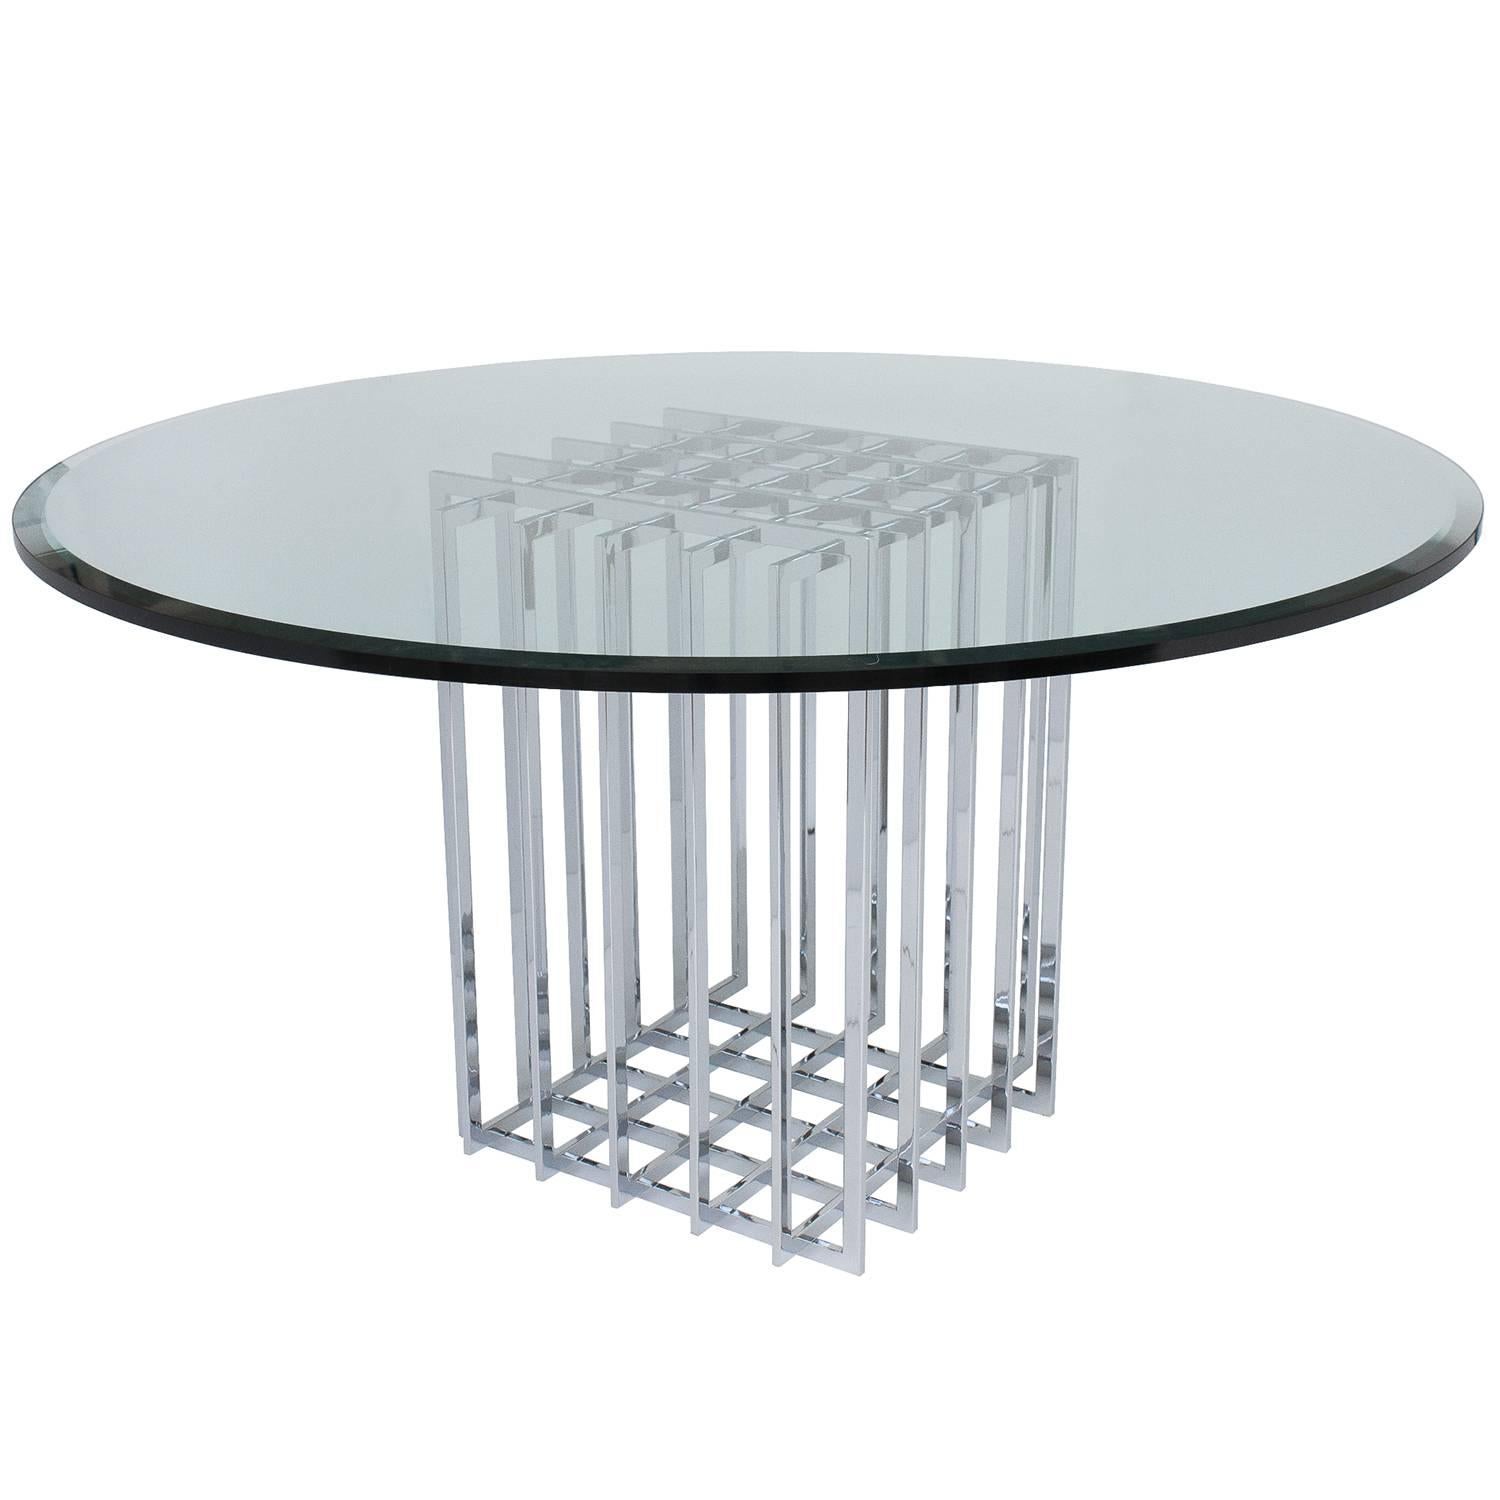 Pierre Cardin Chrome Cage Form Pedestal Dining Table